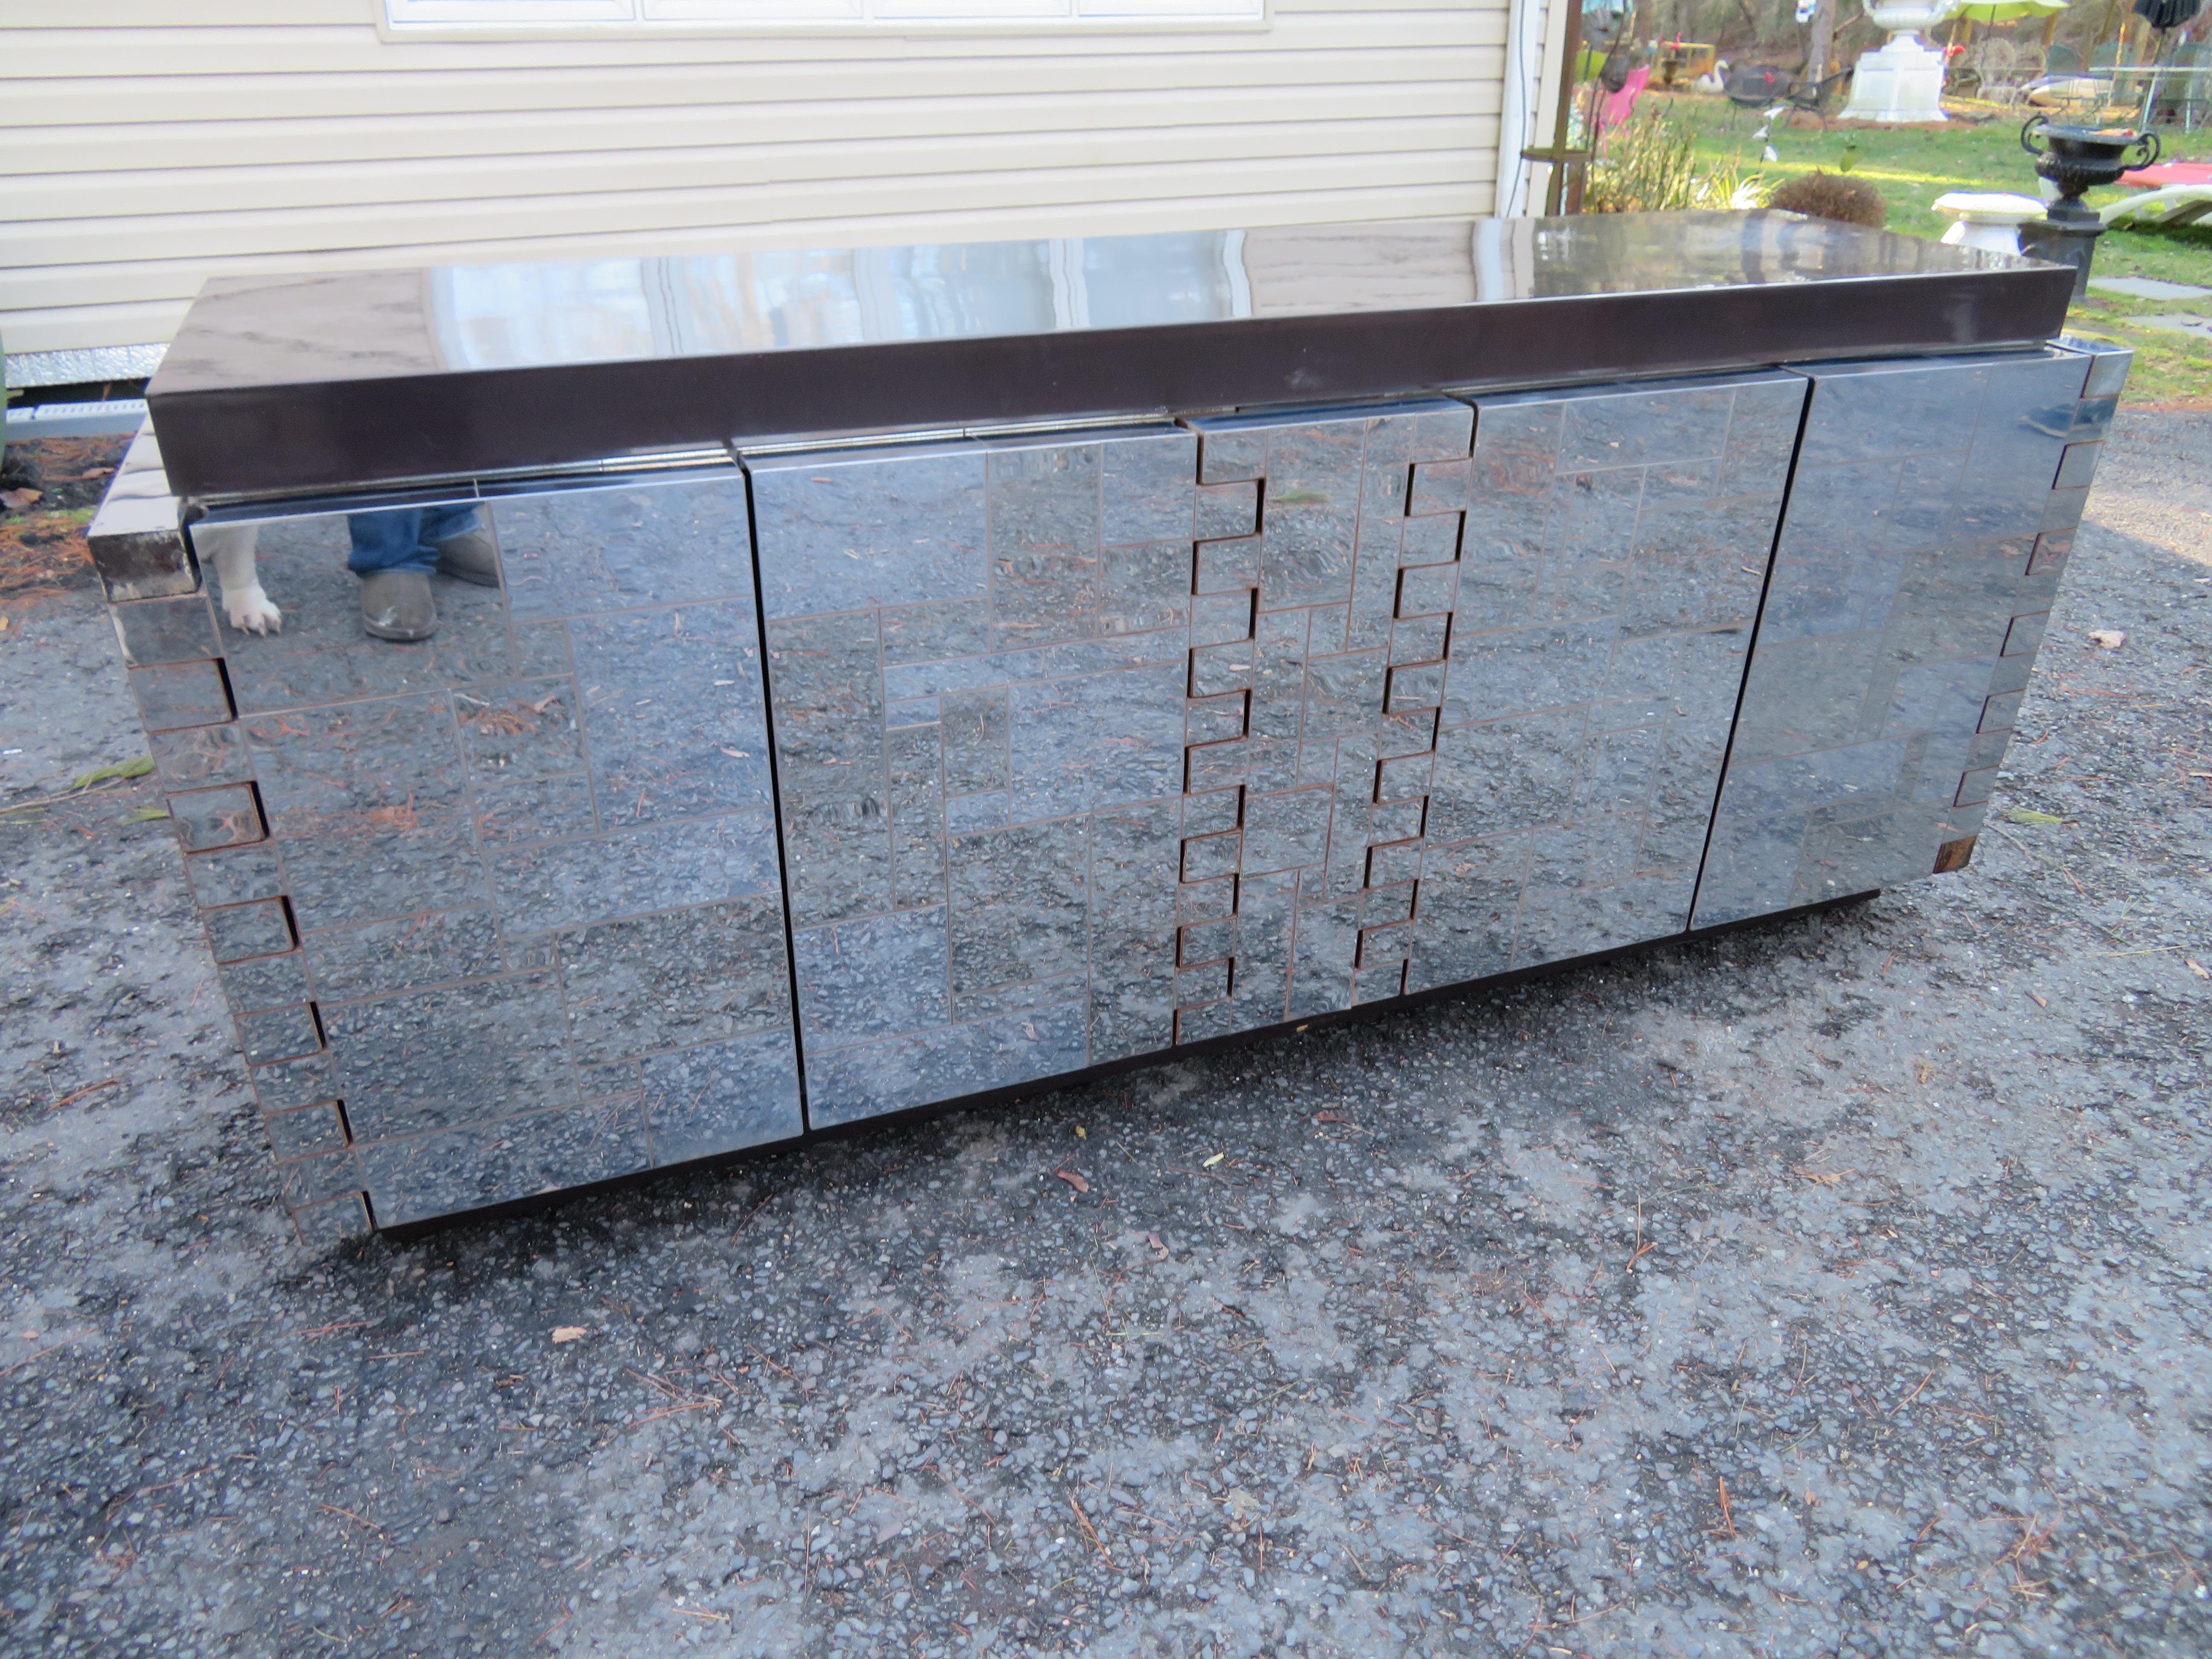 Scrumptious signed Paul Evans cityscape credenza. This piece is quite unique with the puzzle door hinges and the chocolate brown fibreglass top and plinth bottom. There is a signature patch on the inside of one of the doors. This piece is beyond